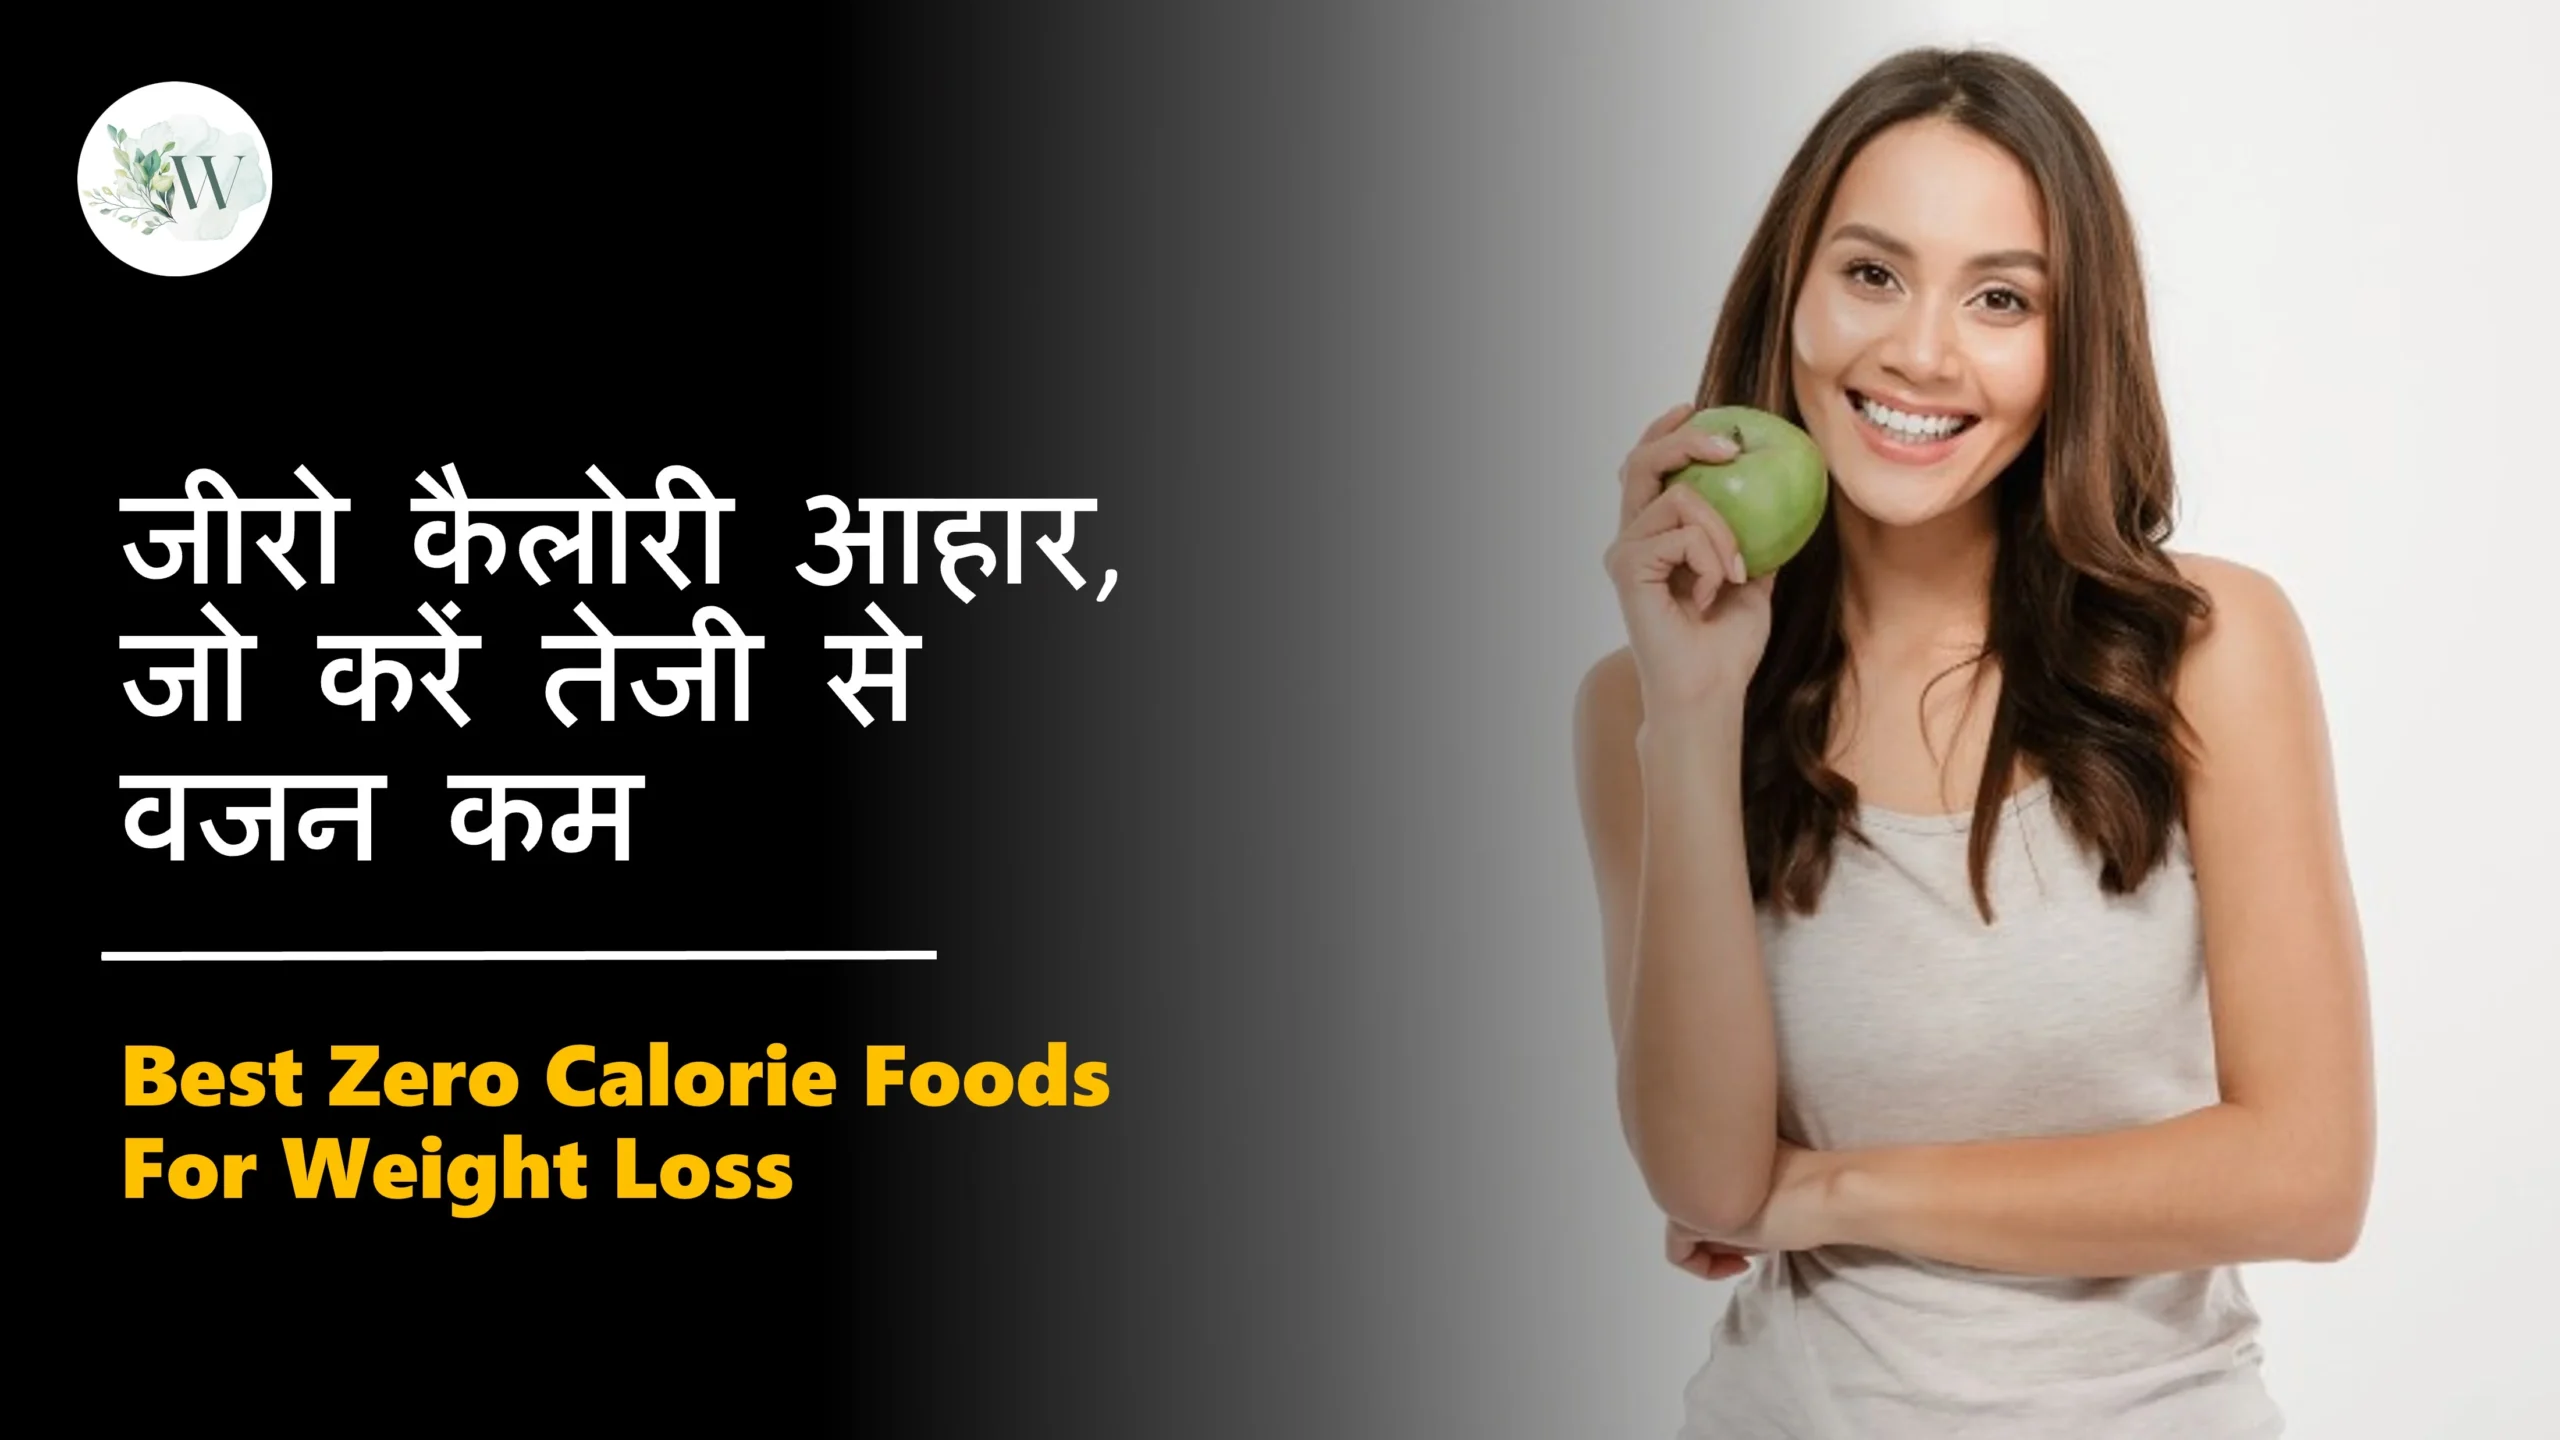 Best Zero Calorie Foods For Weight Loss